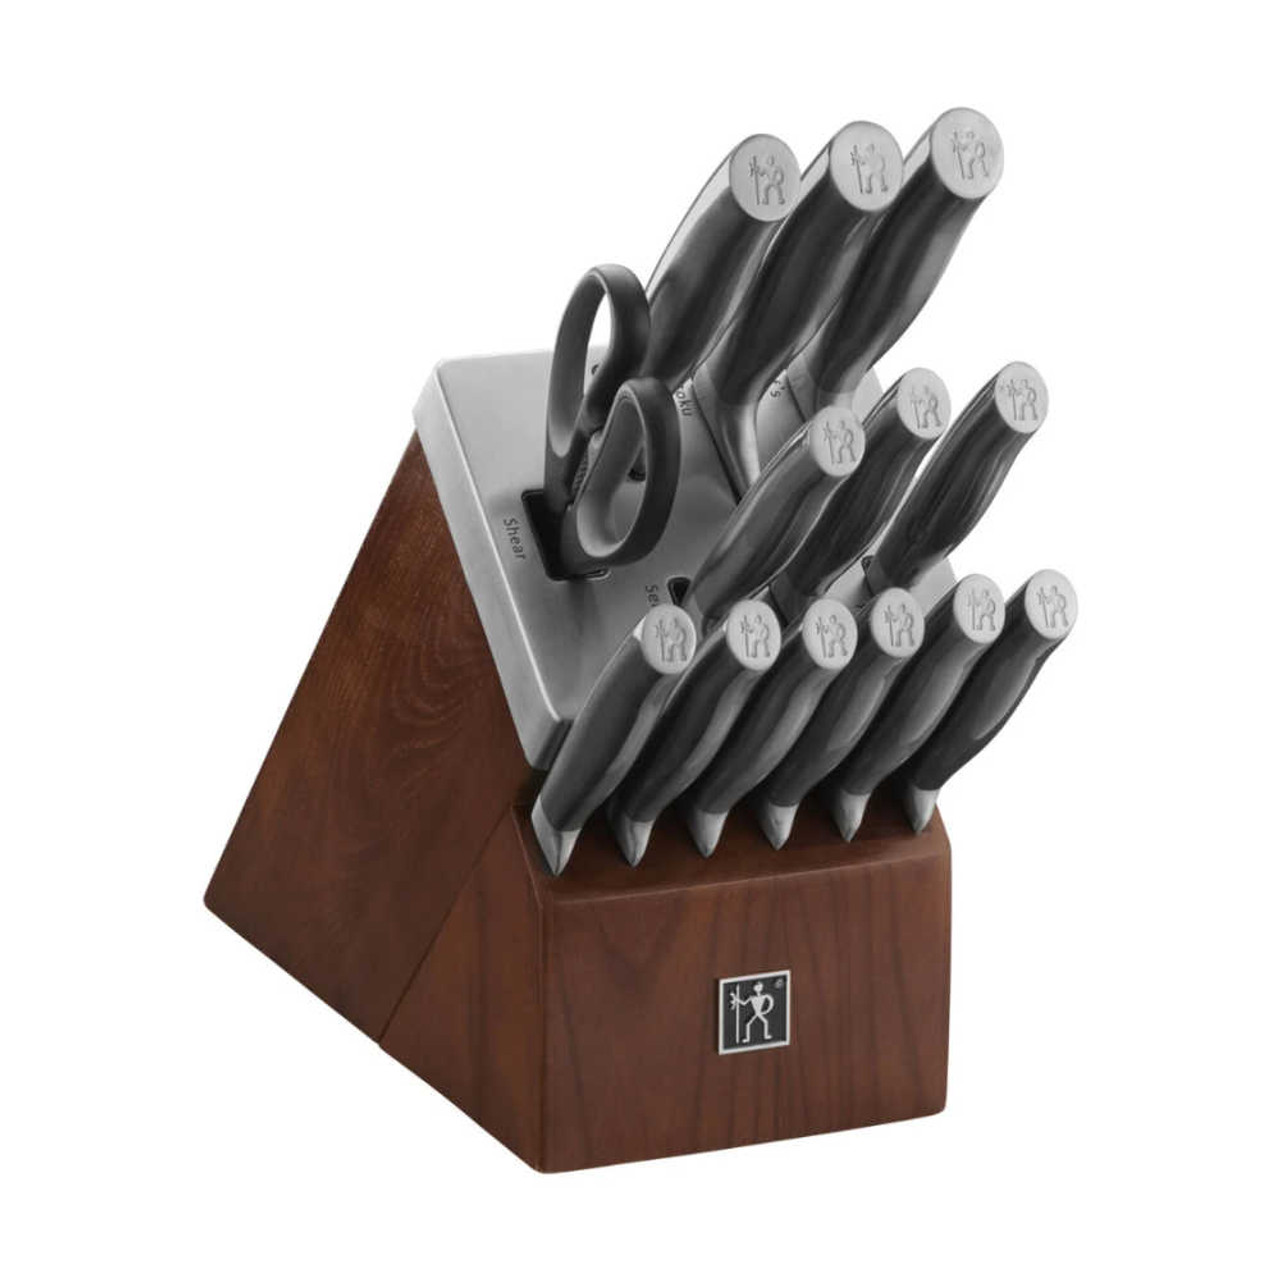 https://cdn11.bigcommerce.com/s-hccytny0od/images/stencil/1280x1280/products/5183/22377/Henckels_Graphite_14-Piece_Self-Sharpening_Knife_Block_Set__28171.1669148798.jpg?c=2?imbypass=on